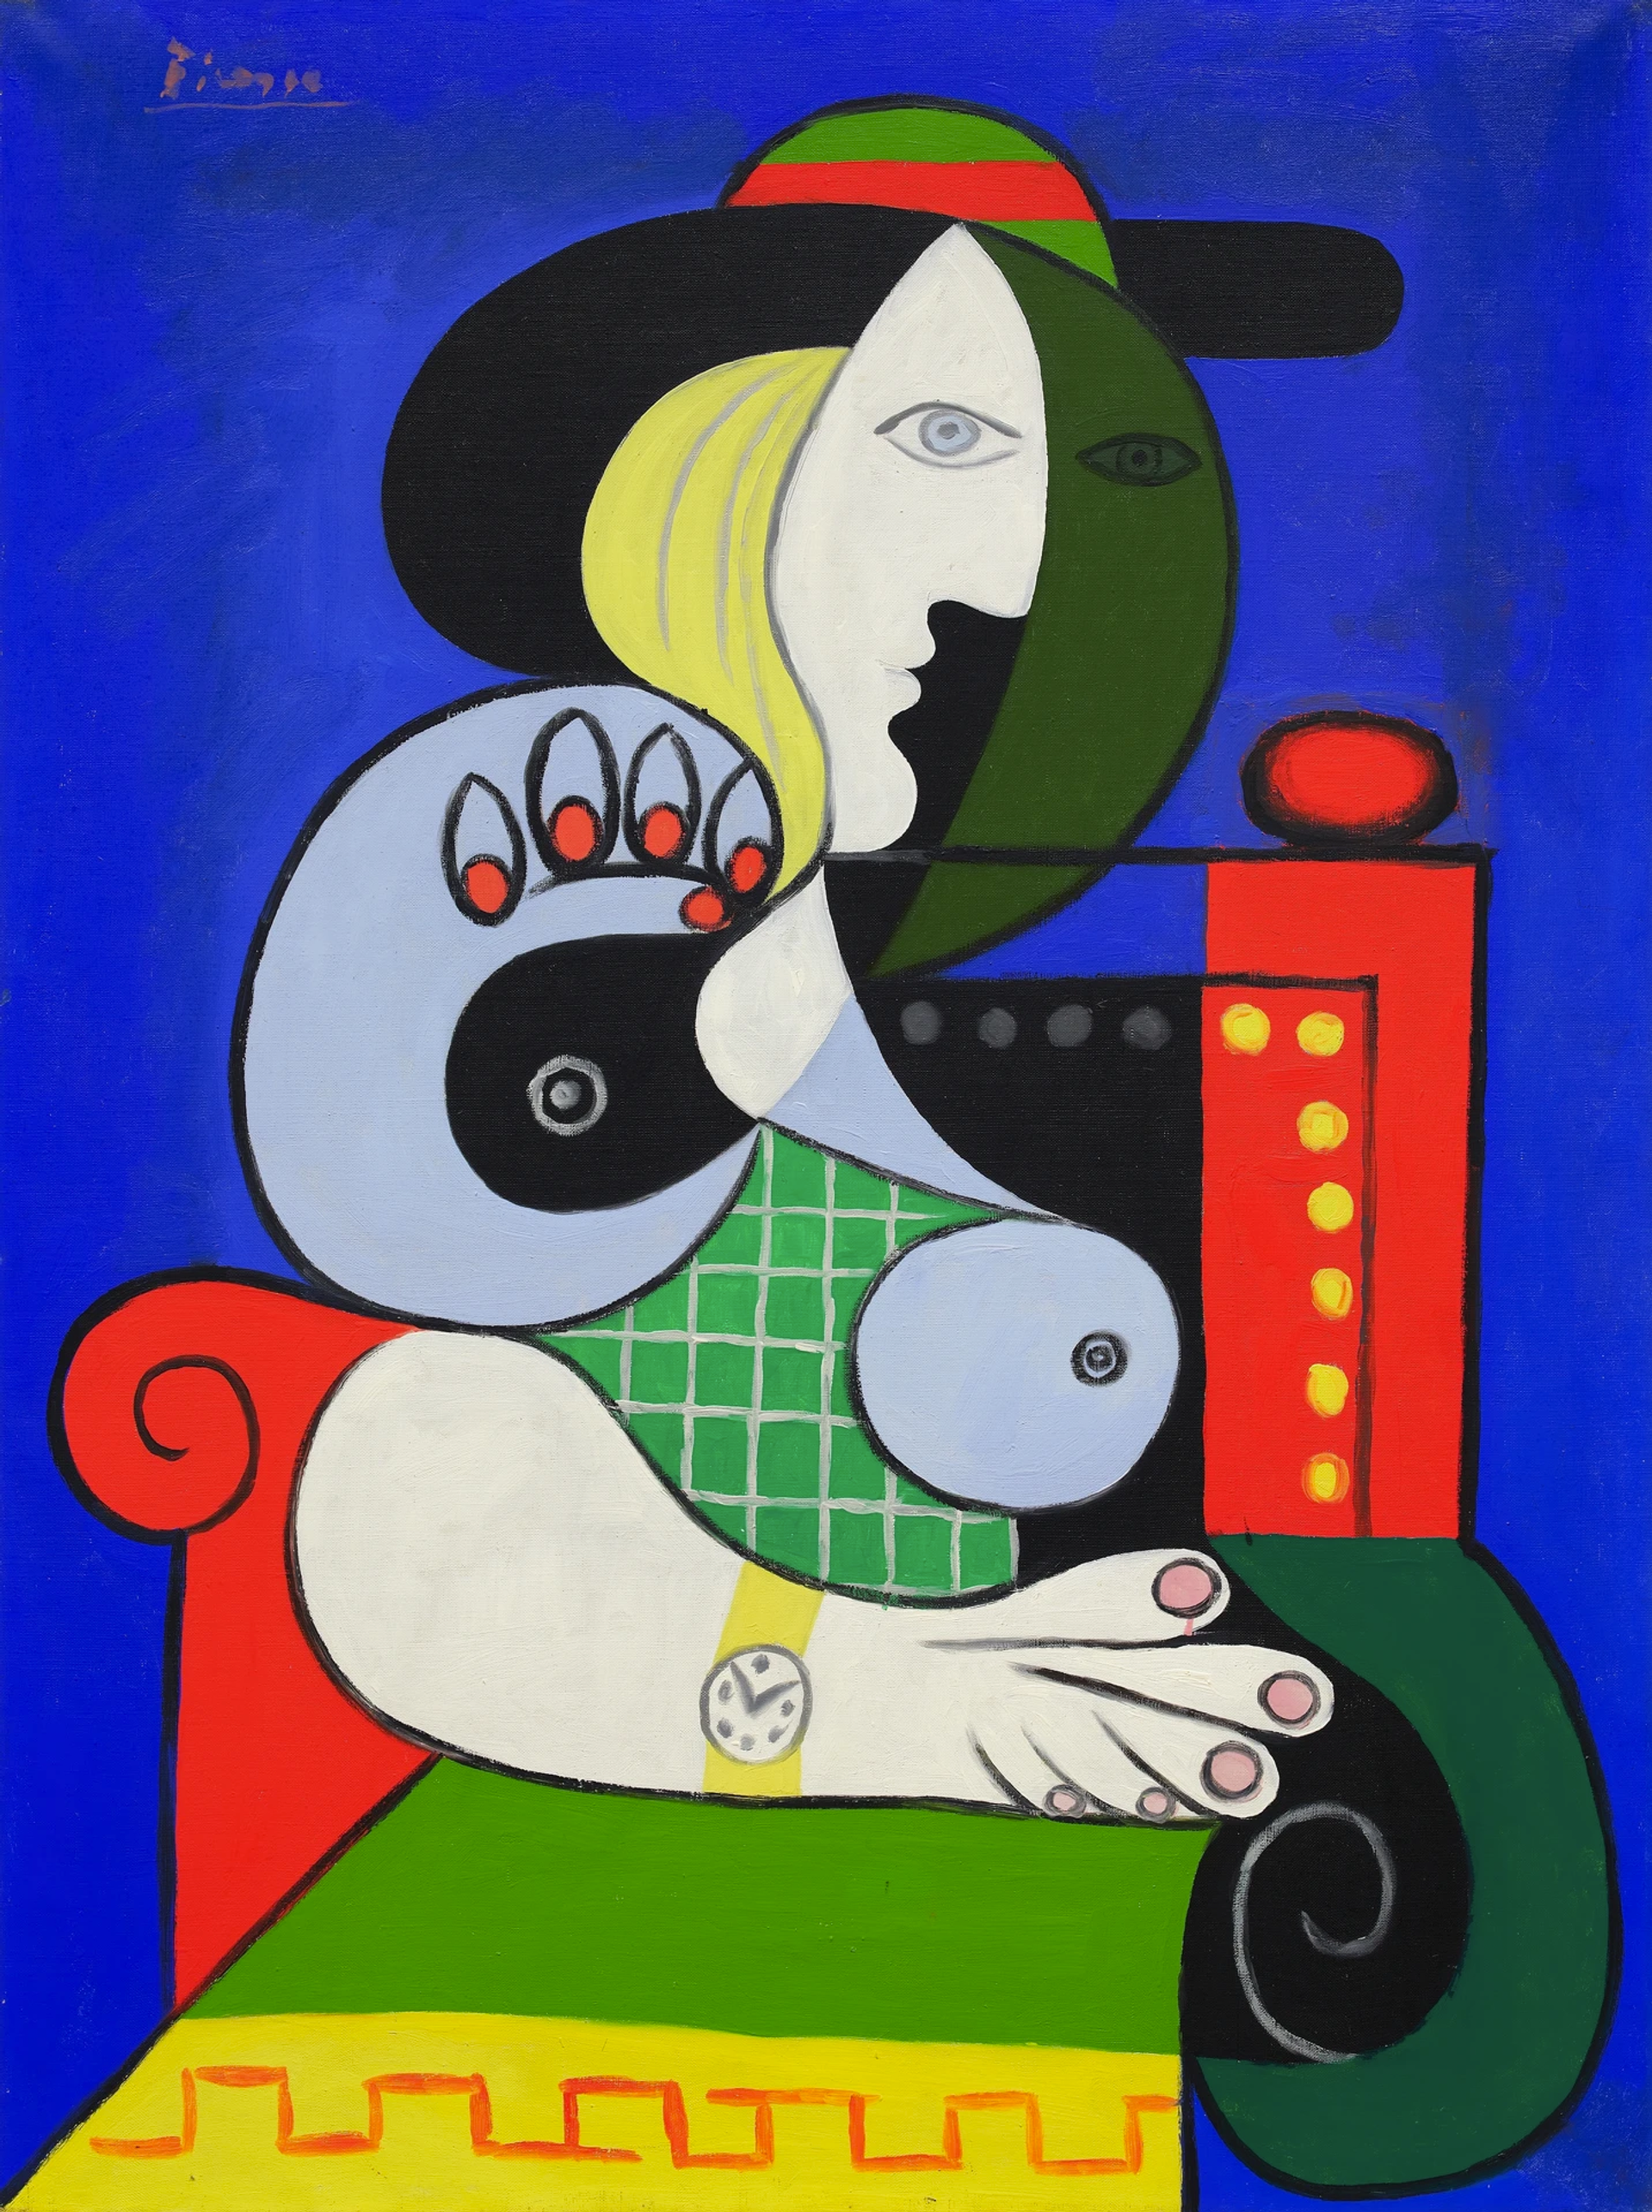 Painting by Pablo Picasso depicting a woman, deconstructed into curvaceous forms of cream, green, yellow, powder blue against a red chair and cobalt blue background.